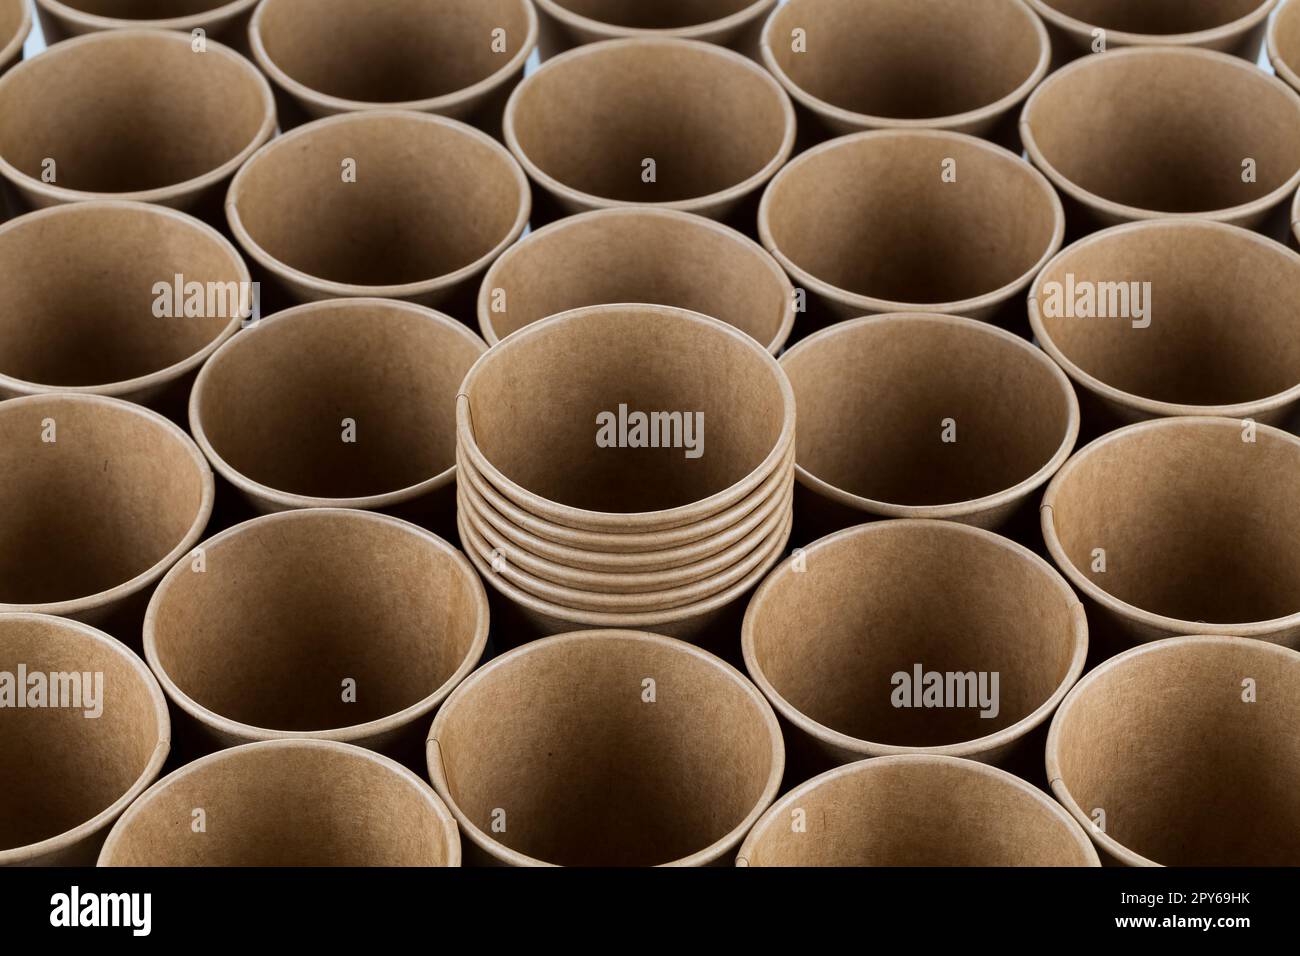 Empty Paper cups background Stock Photo